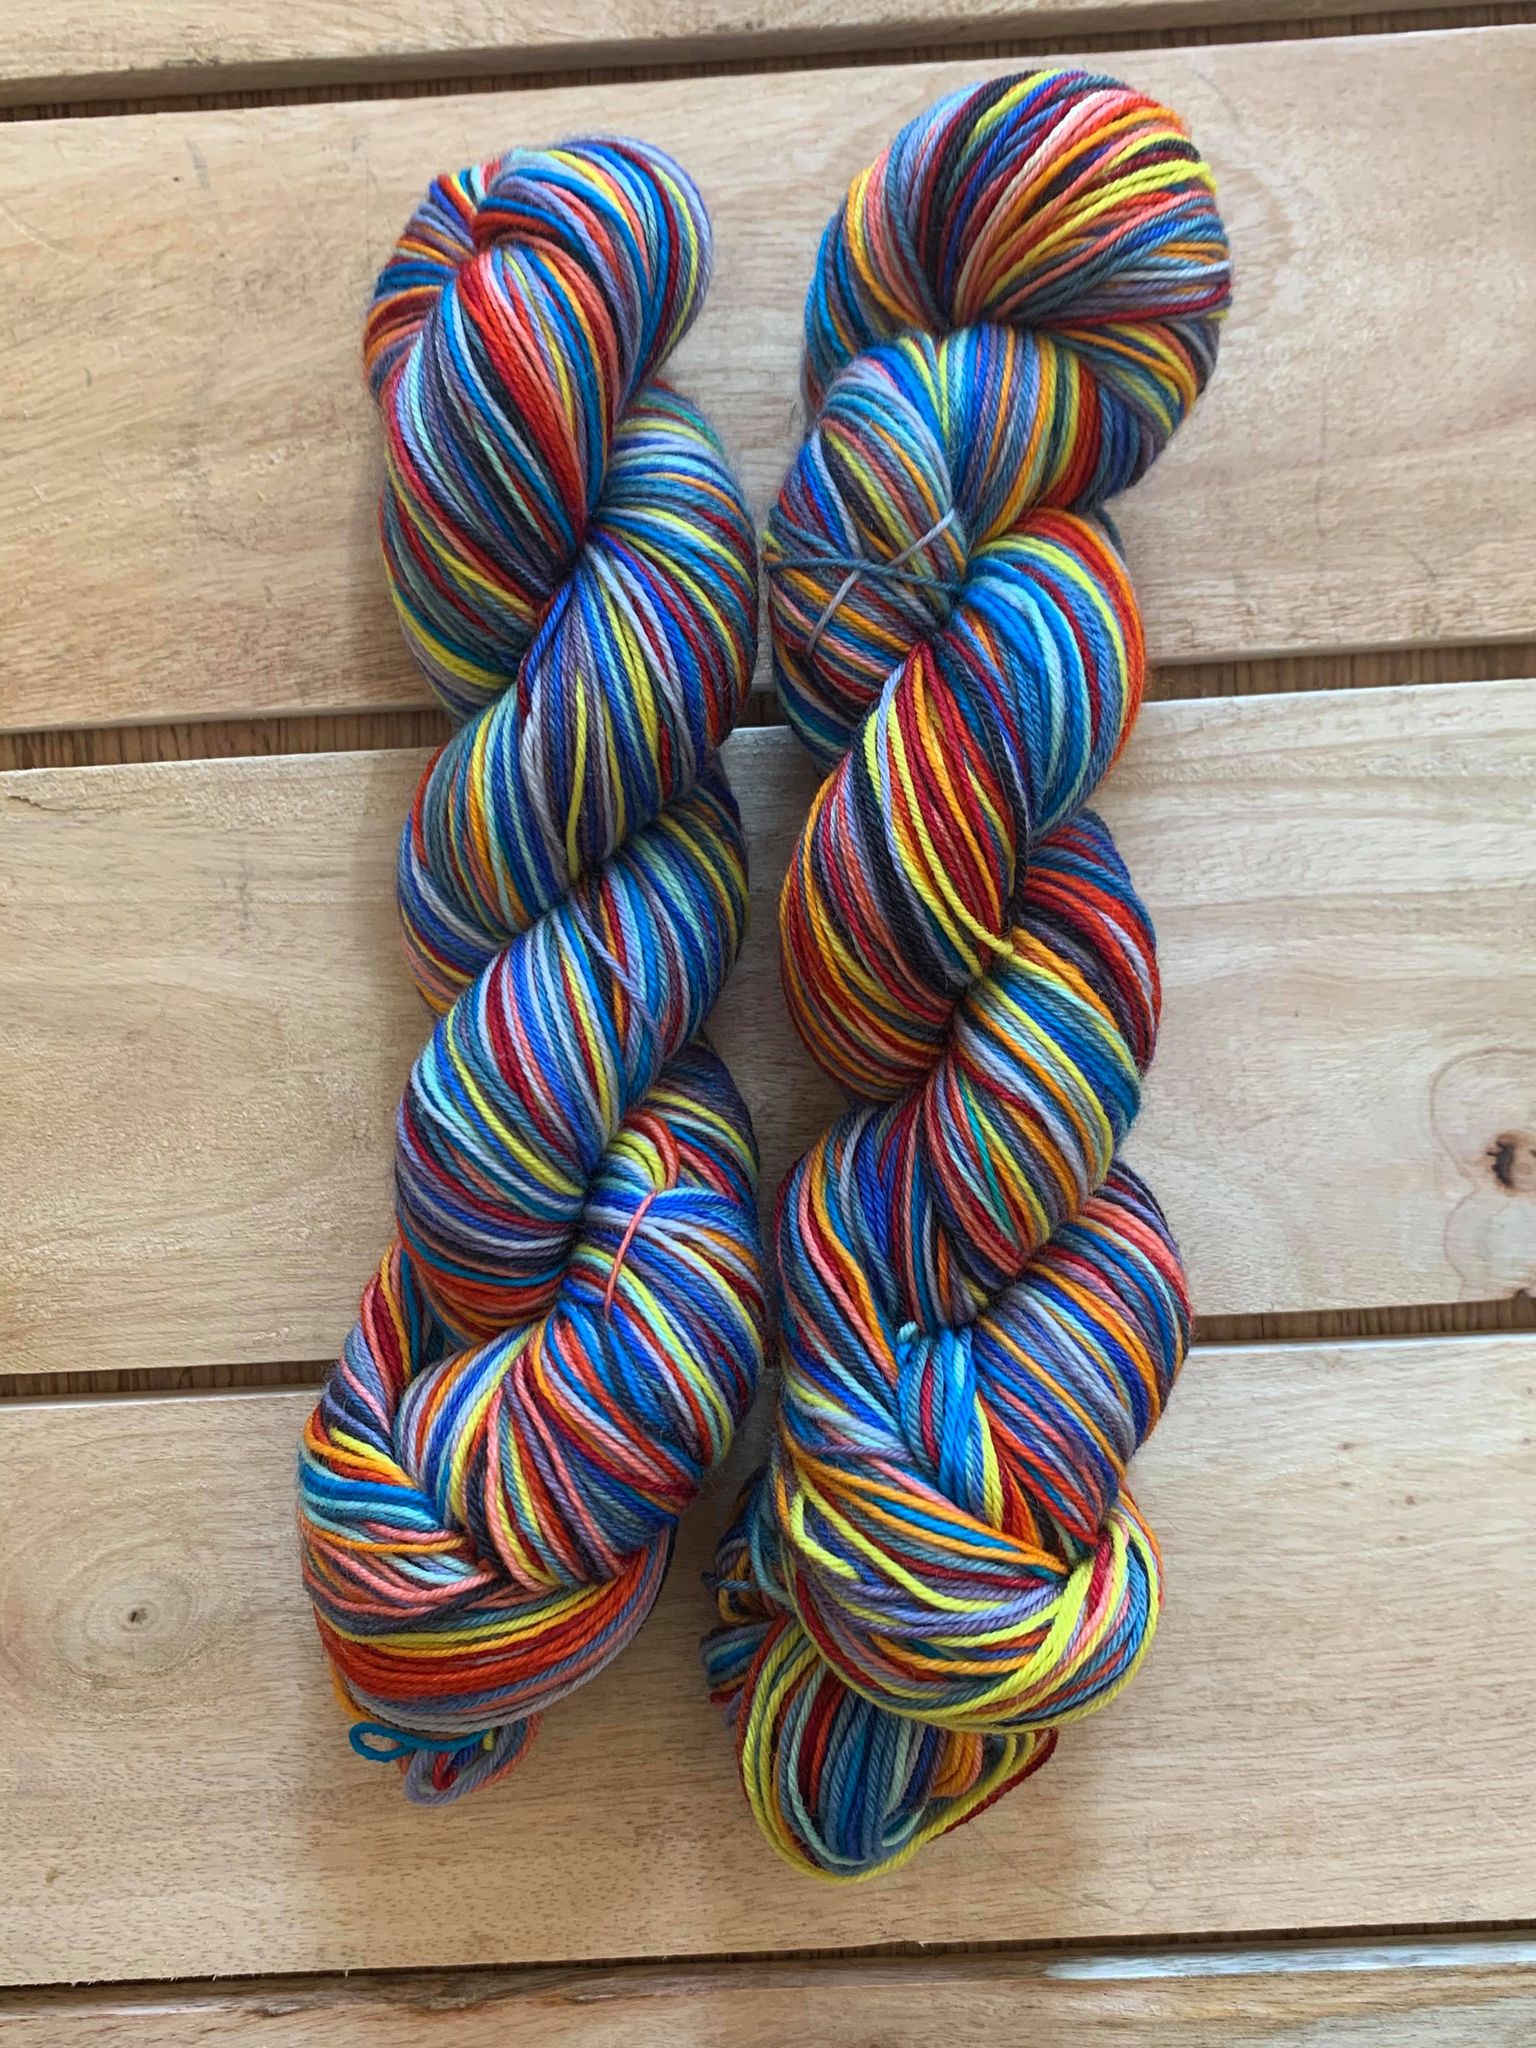 Ready to Ship - The Miser Brothers - Self-Striping Yarn